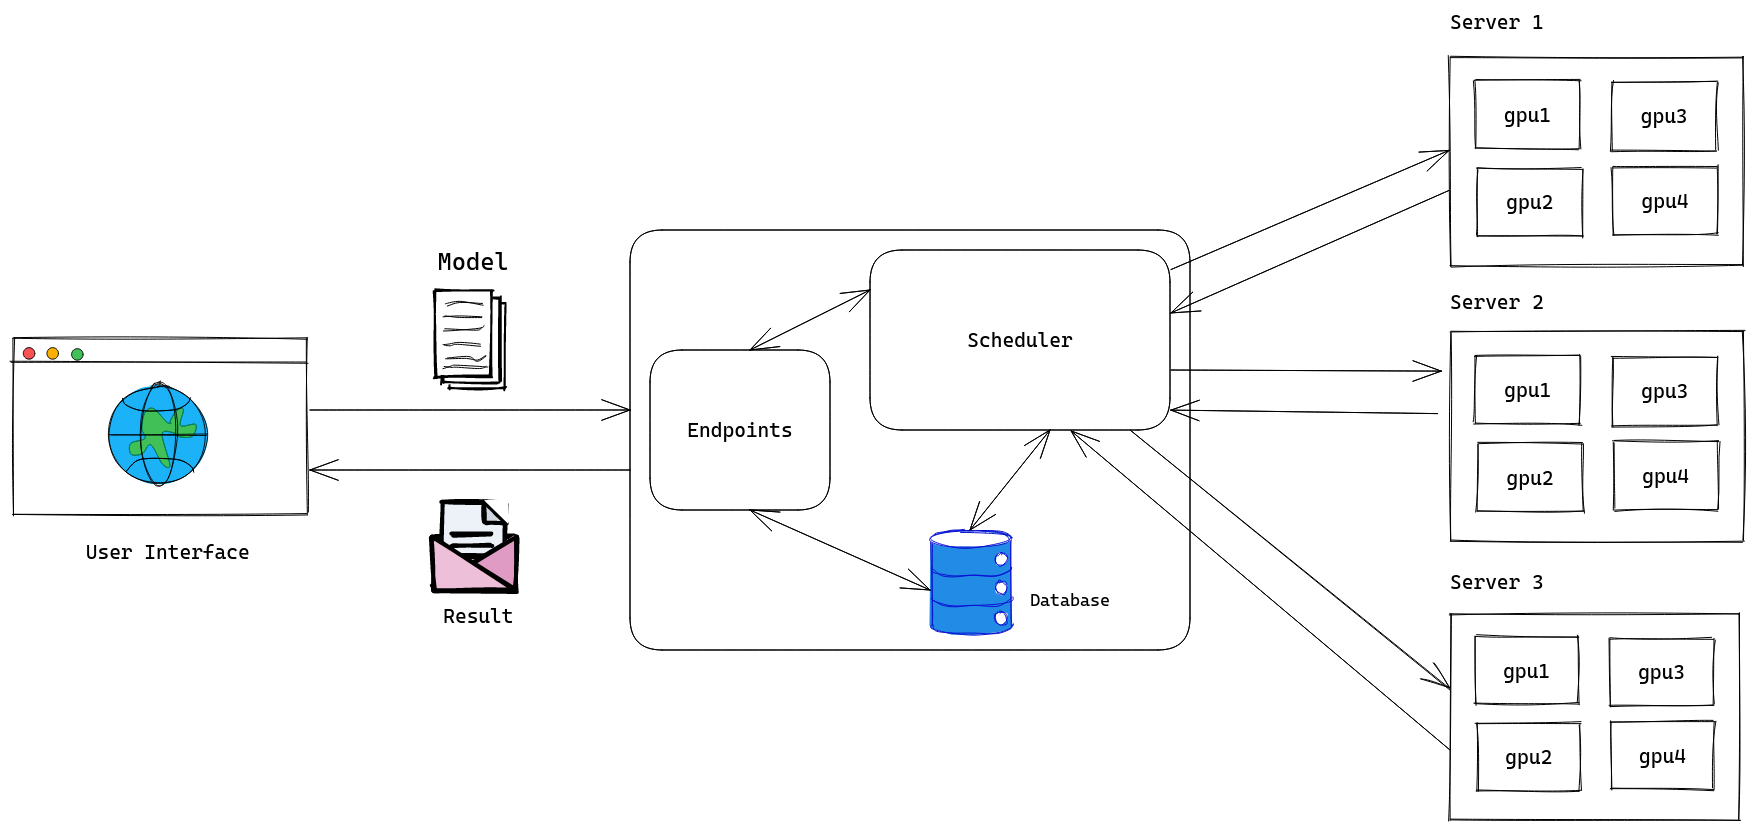 Schedulearn consists of 3 components: UI, API, and the server